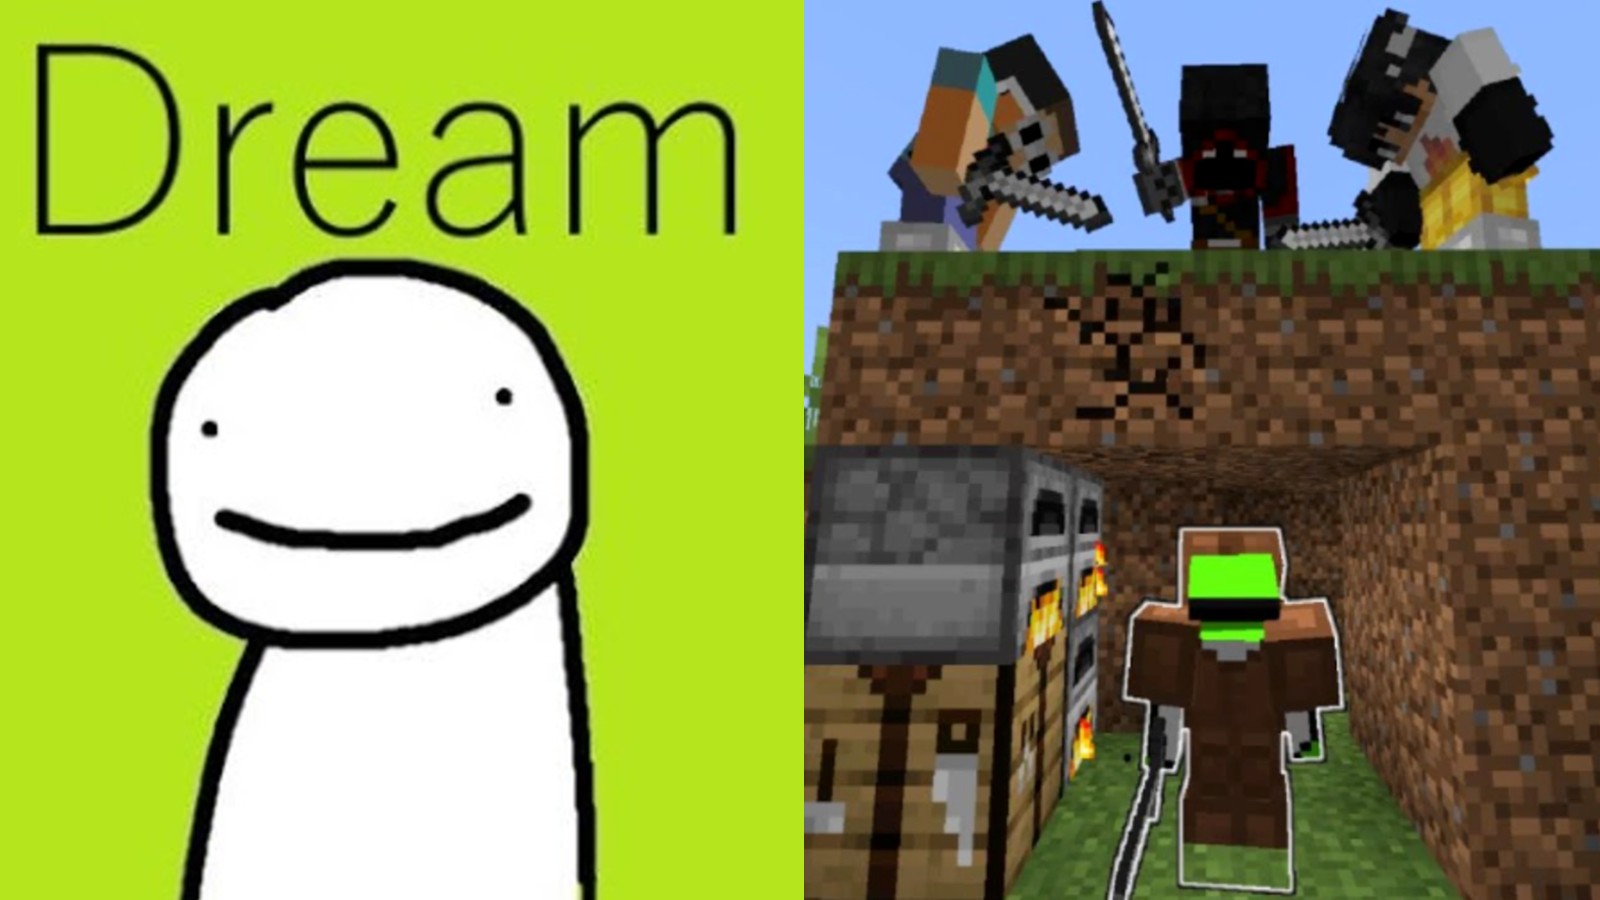 here is everything thats going on about Dream #YOURFAVORITEGUY #dream , dream fake speedrun